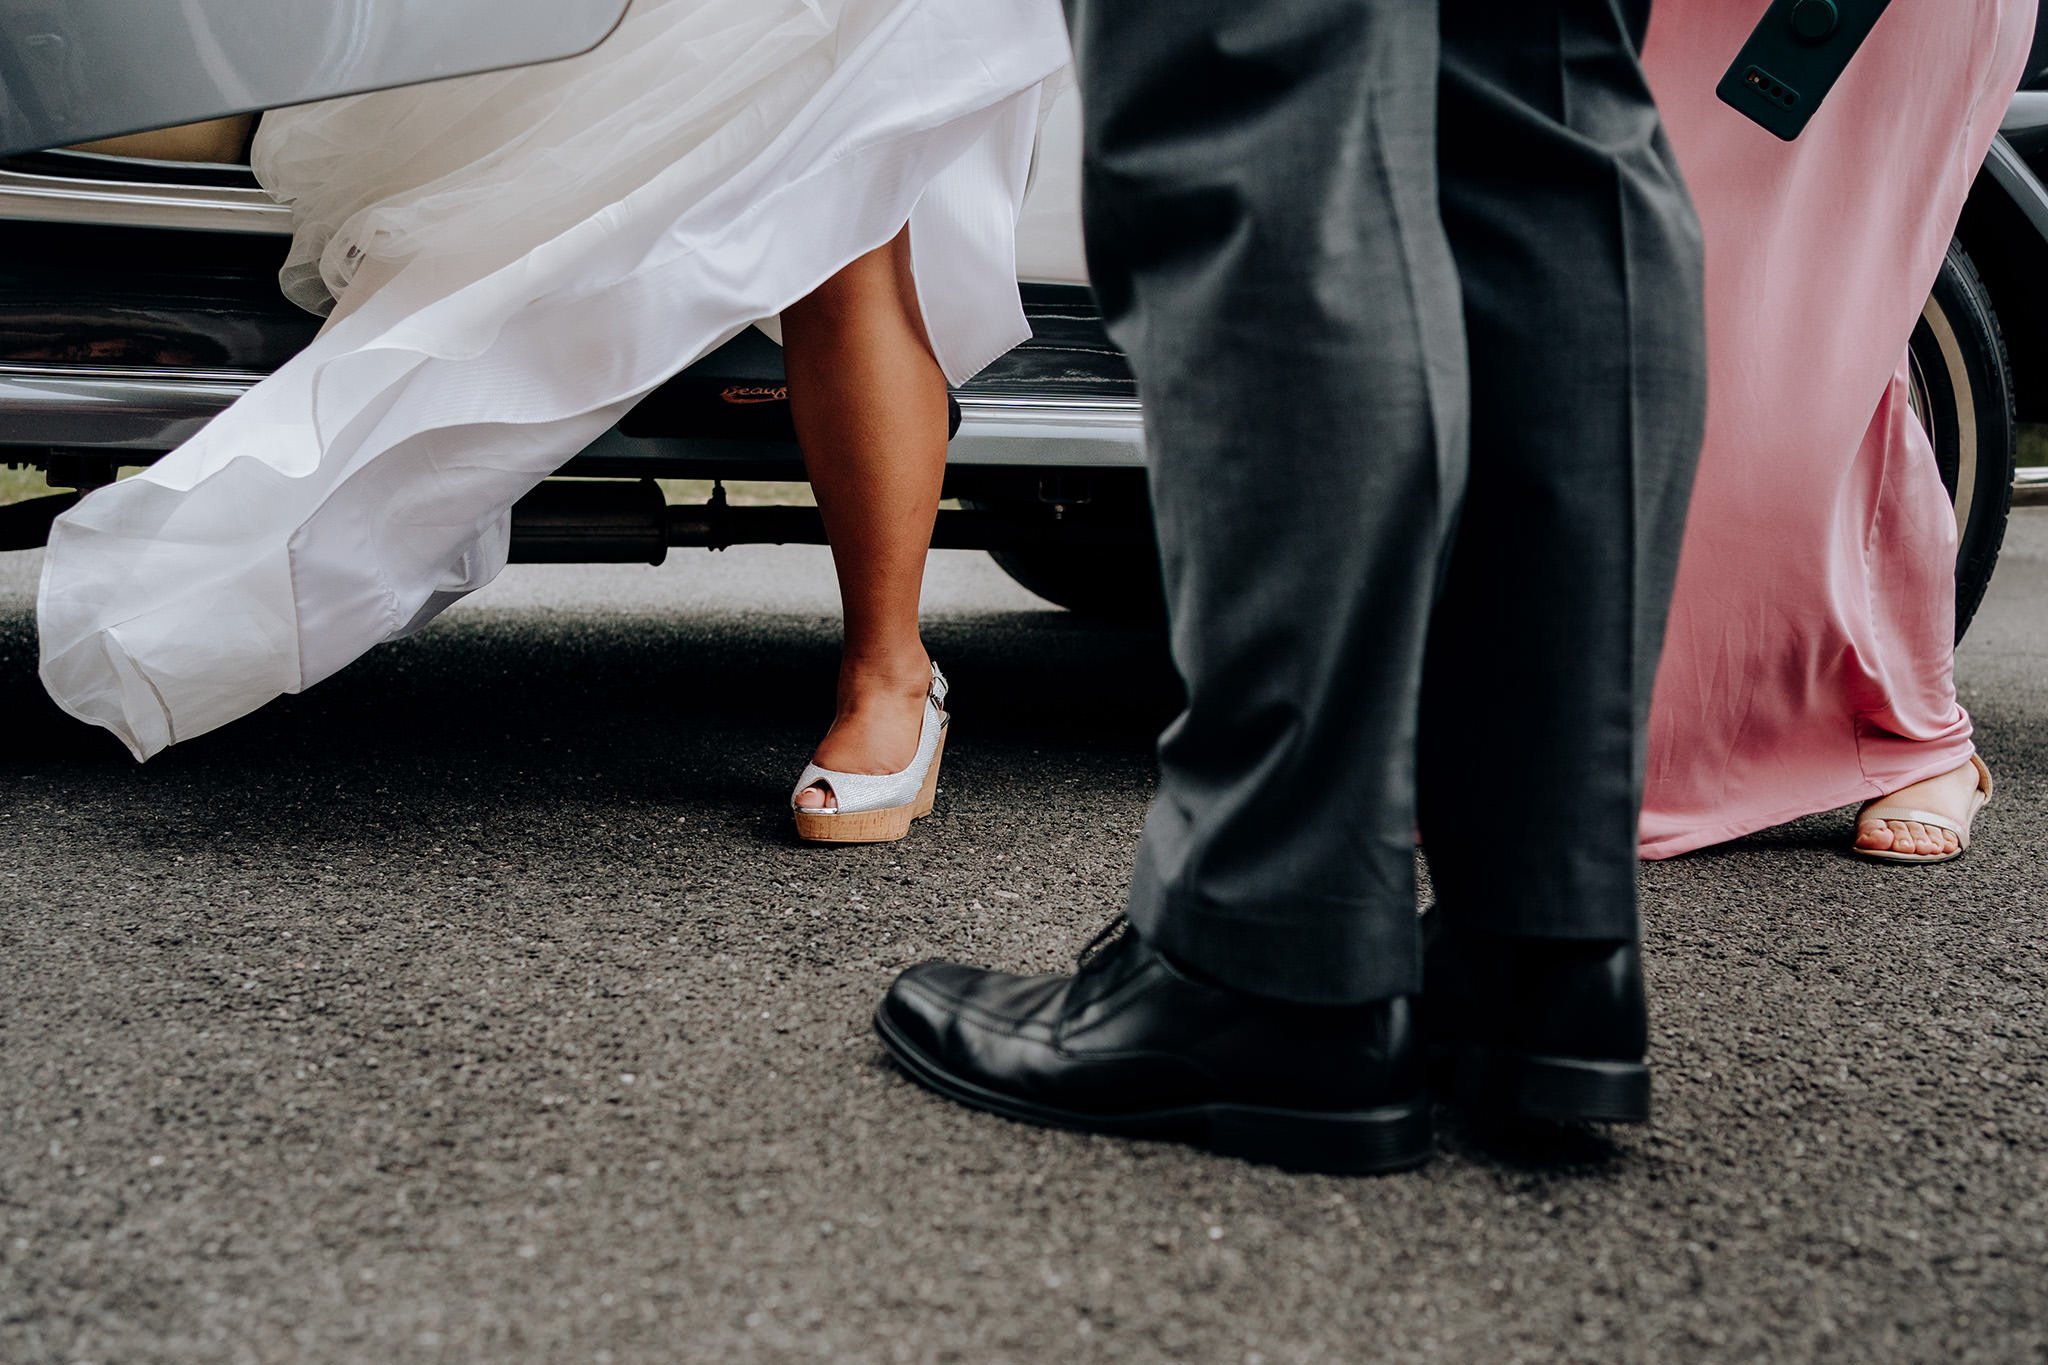 Bride stepping out of the car